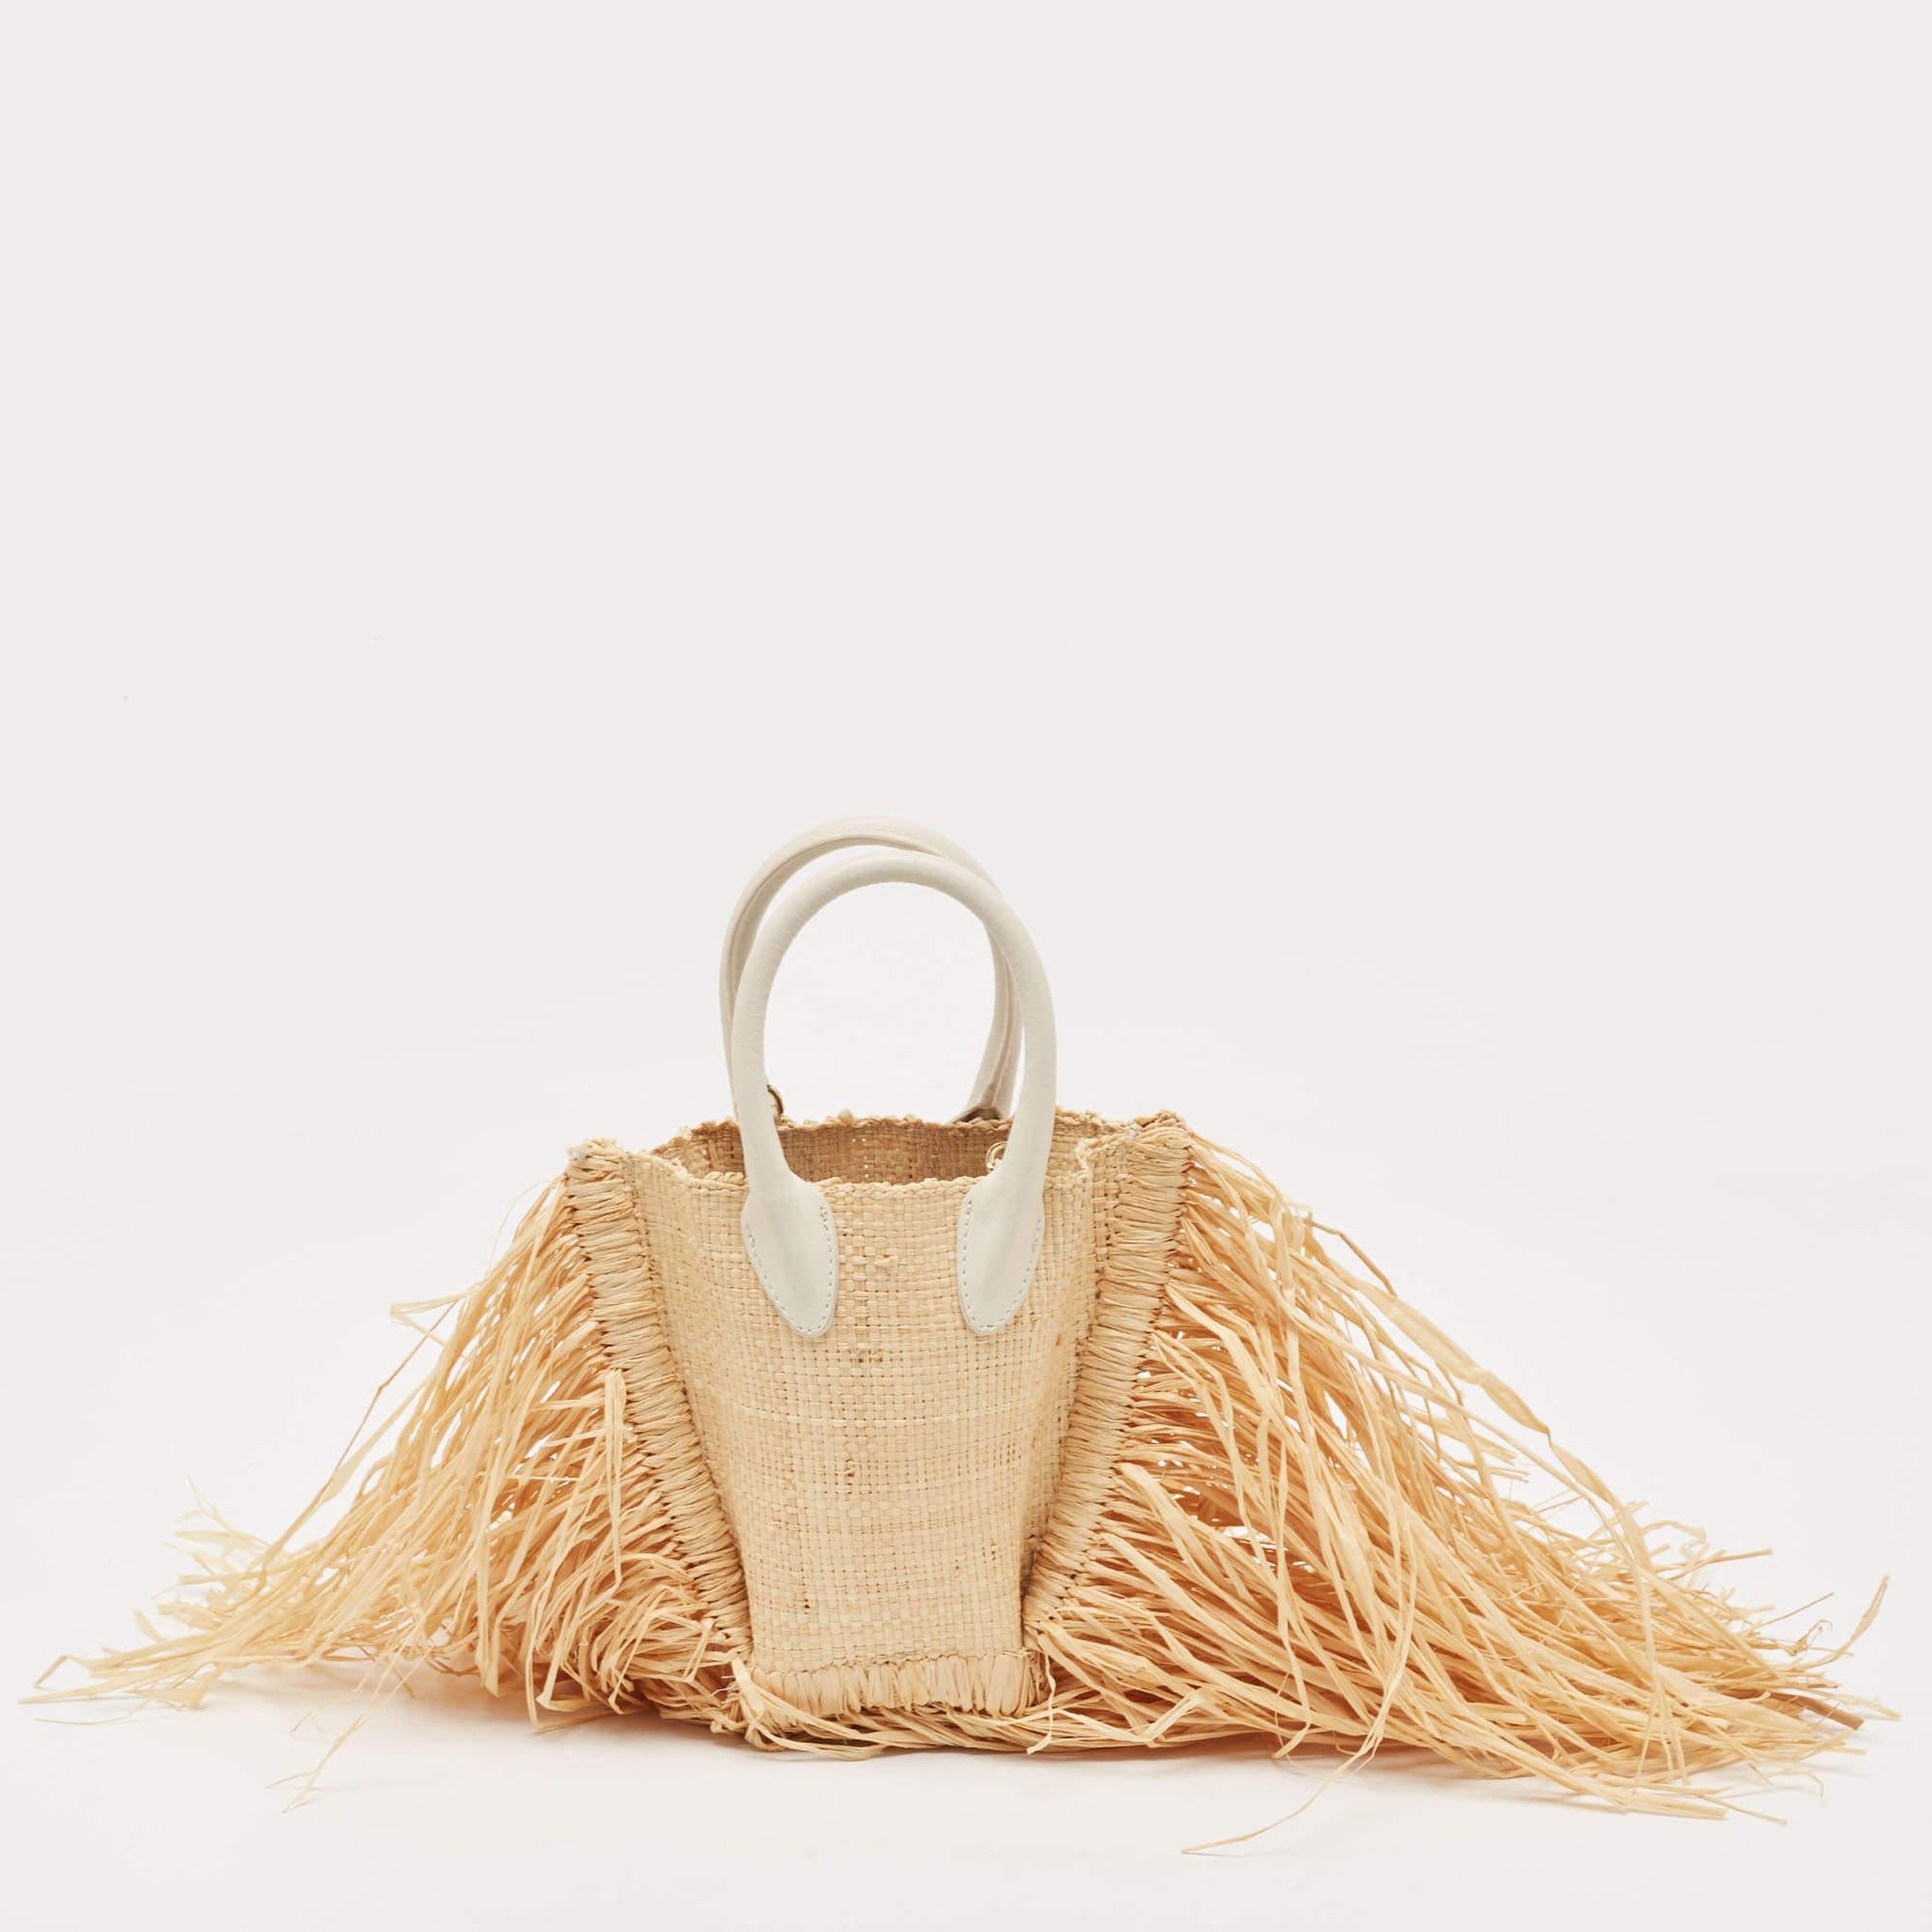 Whether it is a beach or vacation edit, Jacquemus' Let Petite Baci bag promises effortless style. Made of straw and leather, the bag has exaggerated fringes, two shapely handles, and the logo on the front.

Includes: Detachable Strap